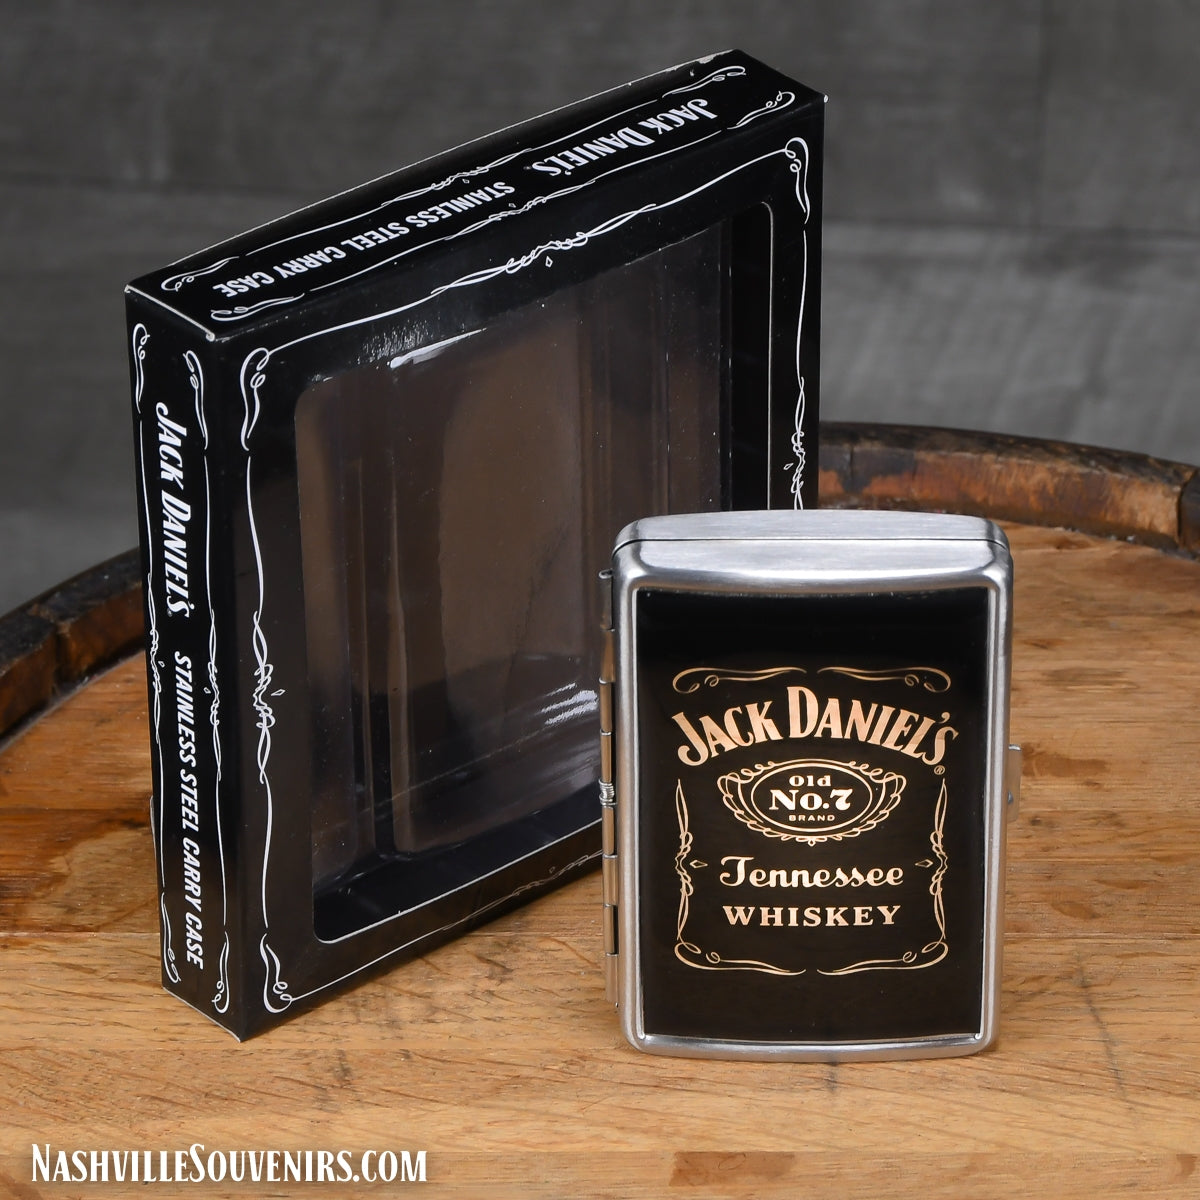 Officially licensed Jack Daniels Stainless Steel Carry Case. Get yours today with FREE SHIPPING on all US orders over $75!